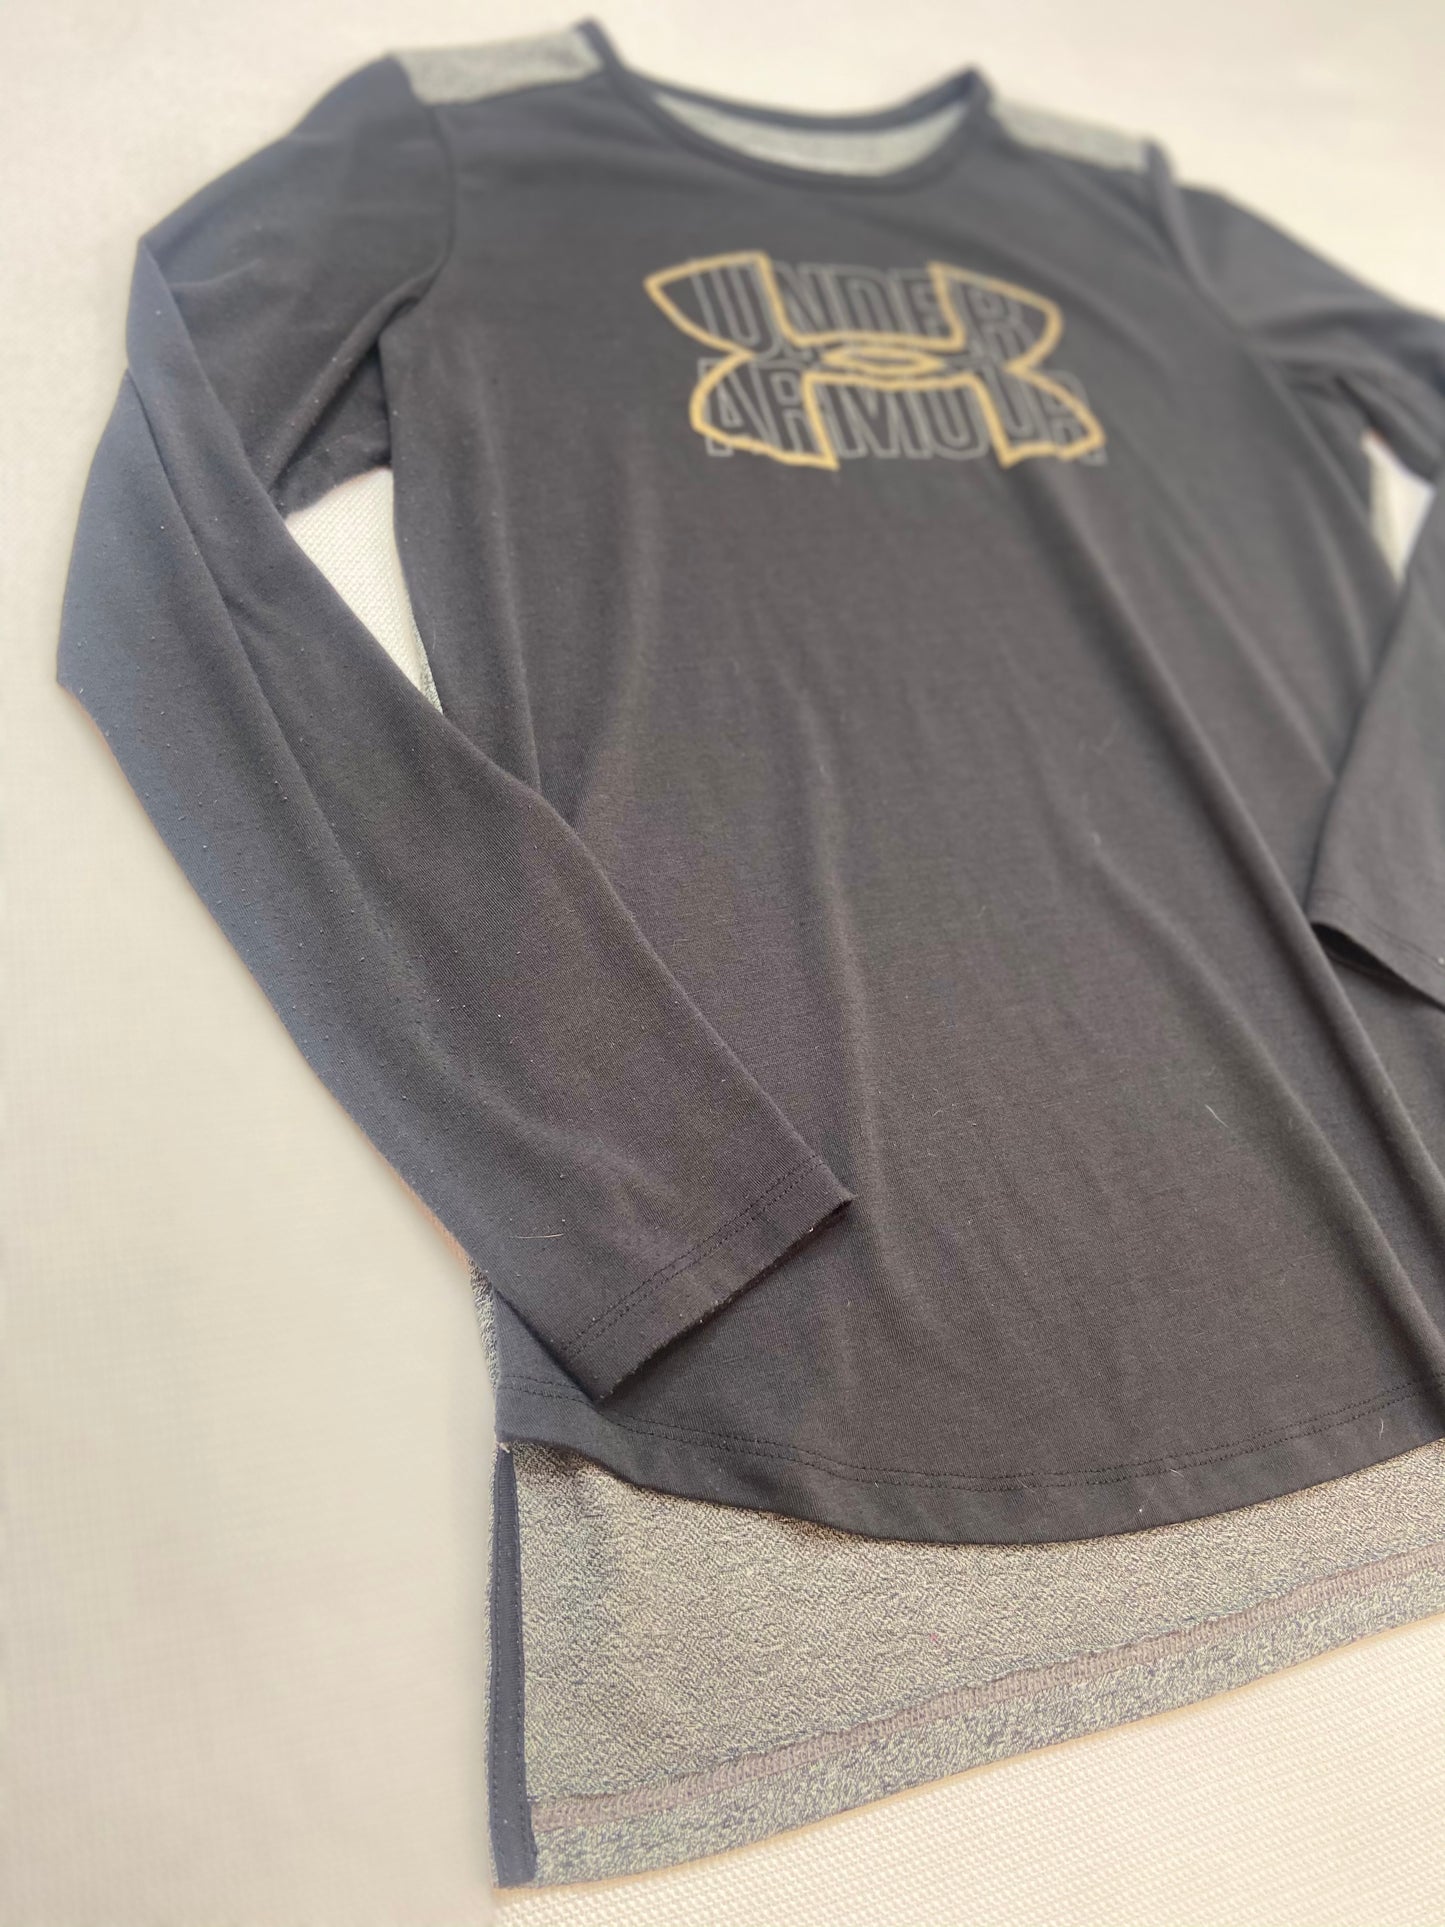 Black Front and Gray Back Long Sleeve Under Armour- S